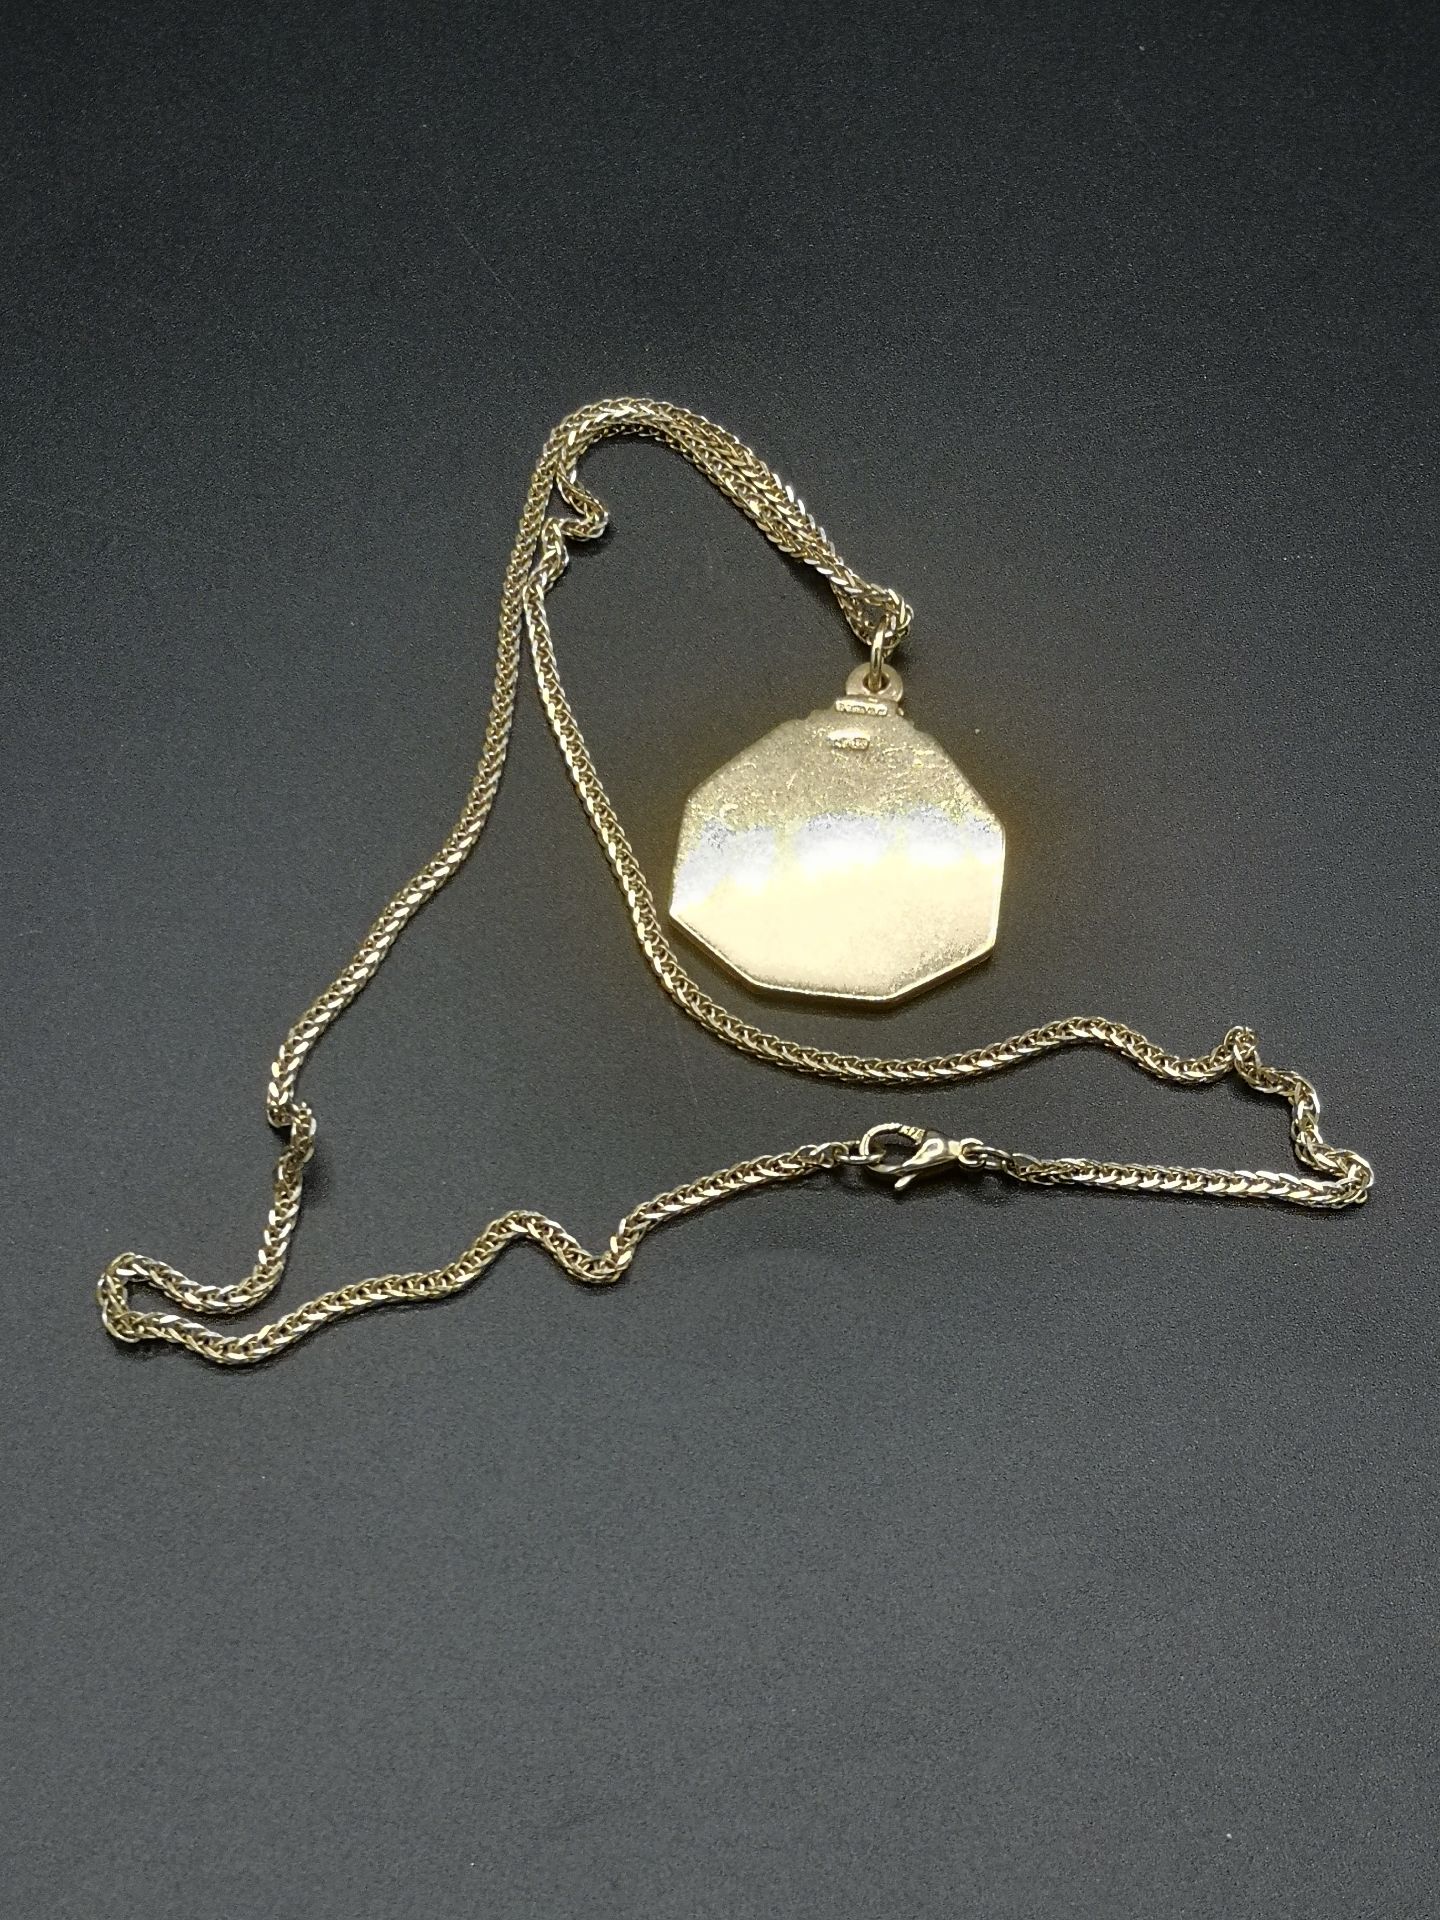 9ct gold necklace with 9ct gold pendant - Image 5 of 5